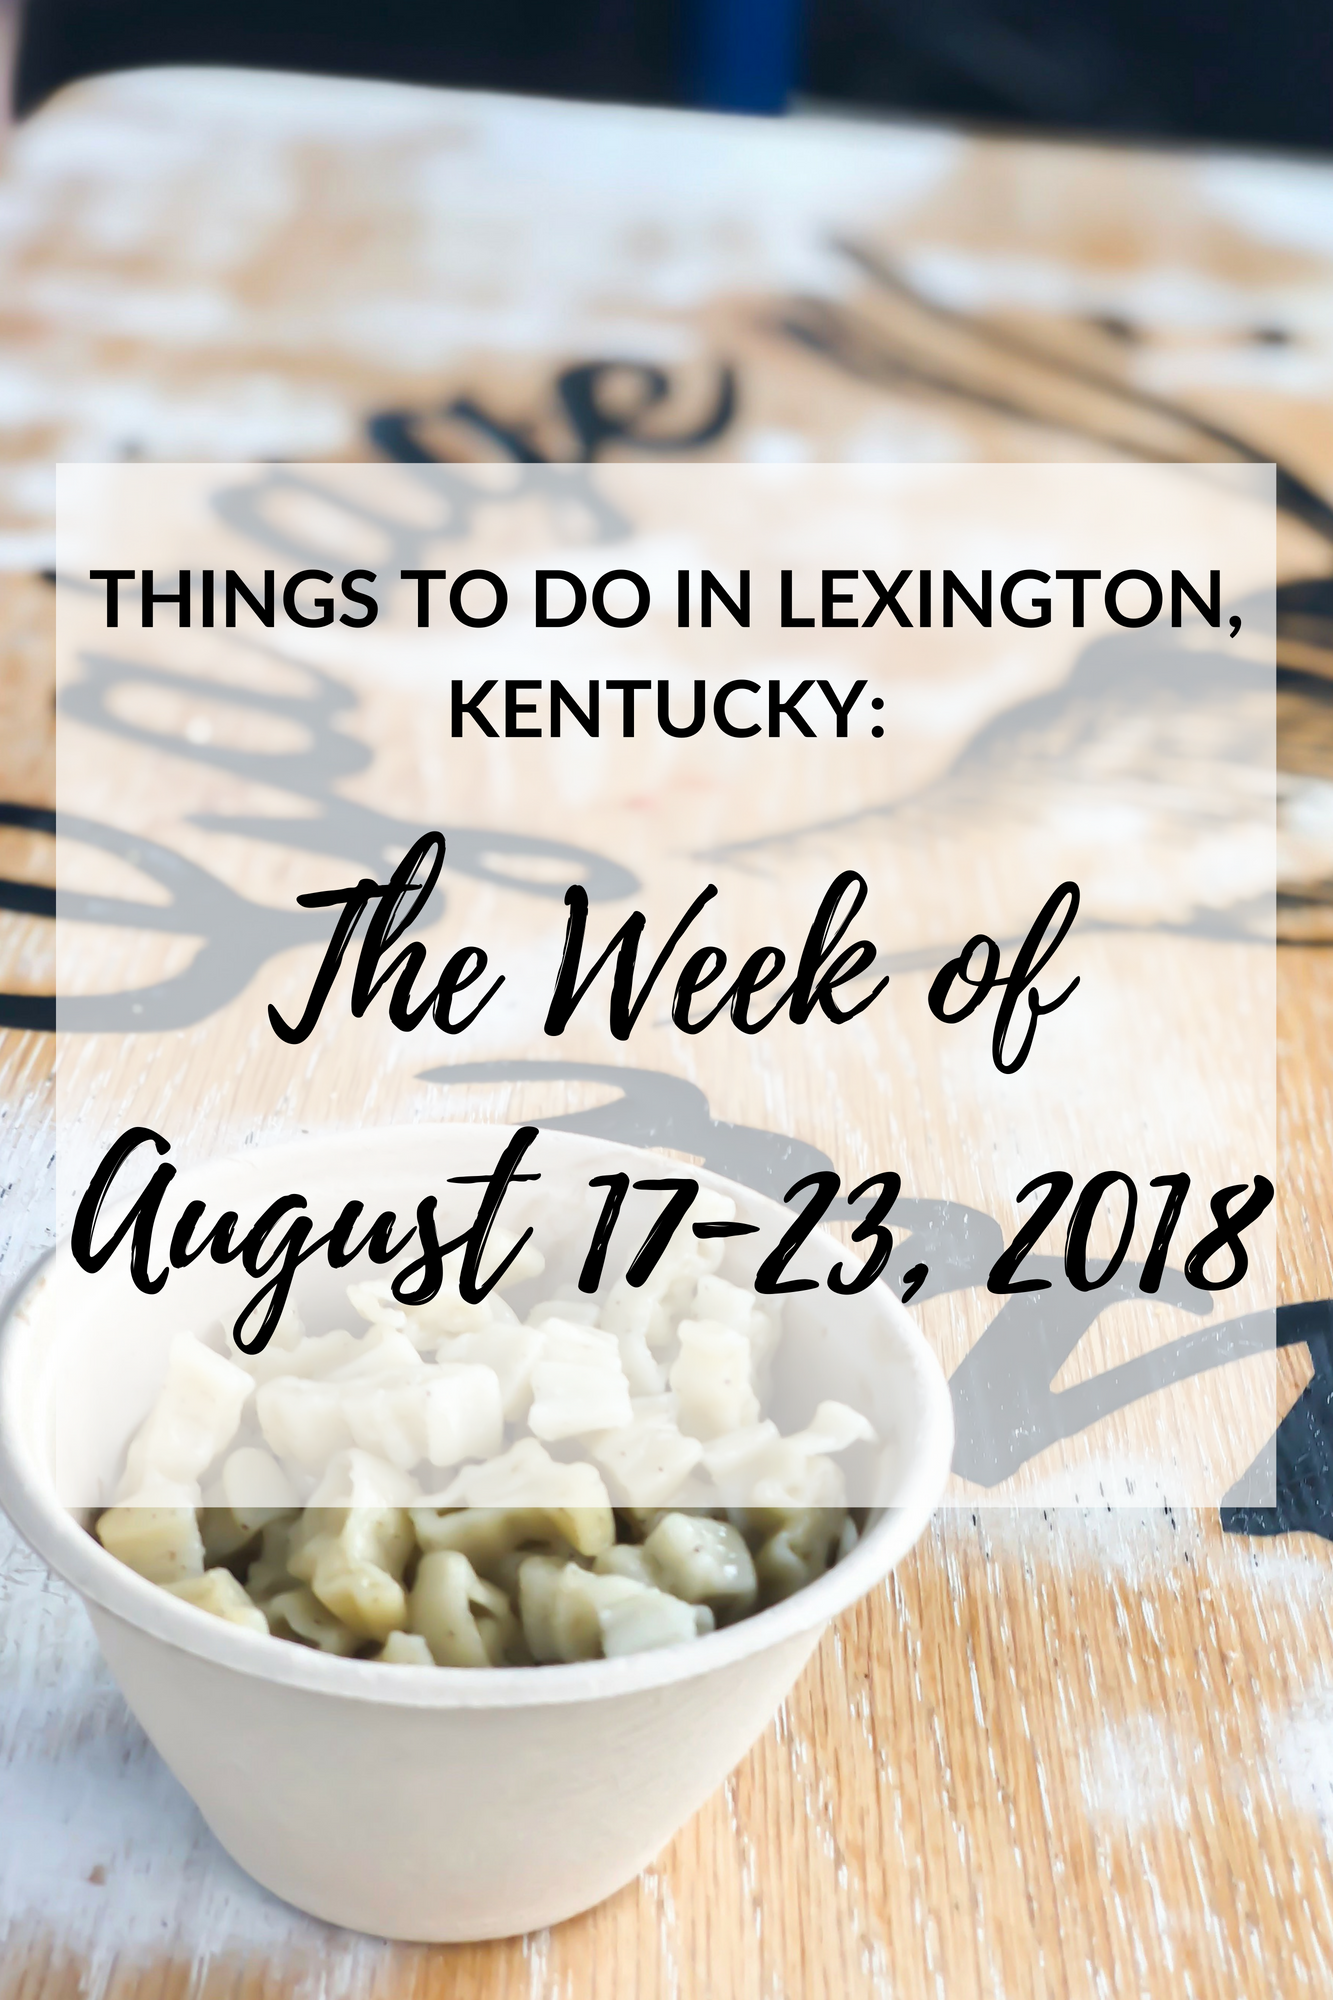 We've made it through another week! Since I can’t include everything on my list, I’ve handpicked the events and included the ones that I think everyone would enjoy the most! #sharethelex #travel #event #thingstodo #lexingtonky #lexington #kentucky